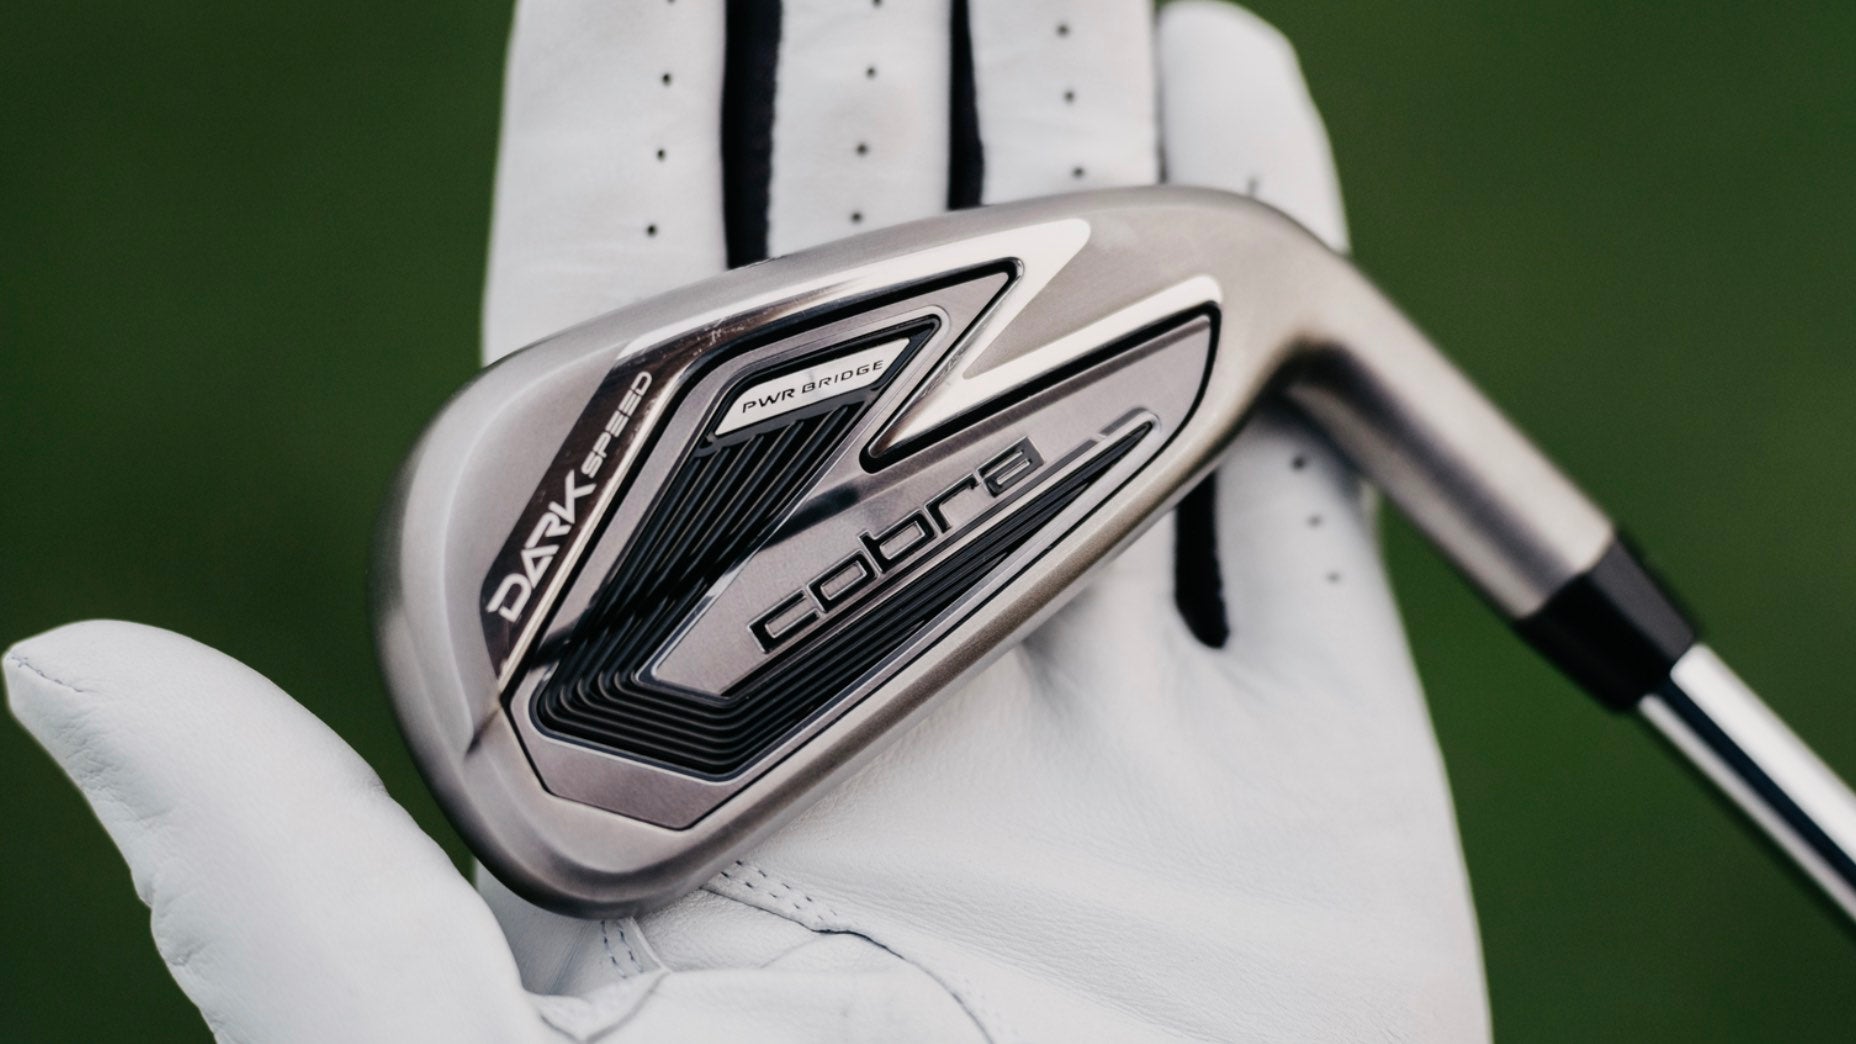 Cobra Darkspeed hybrids and irons Everything you need to know